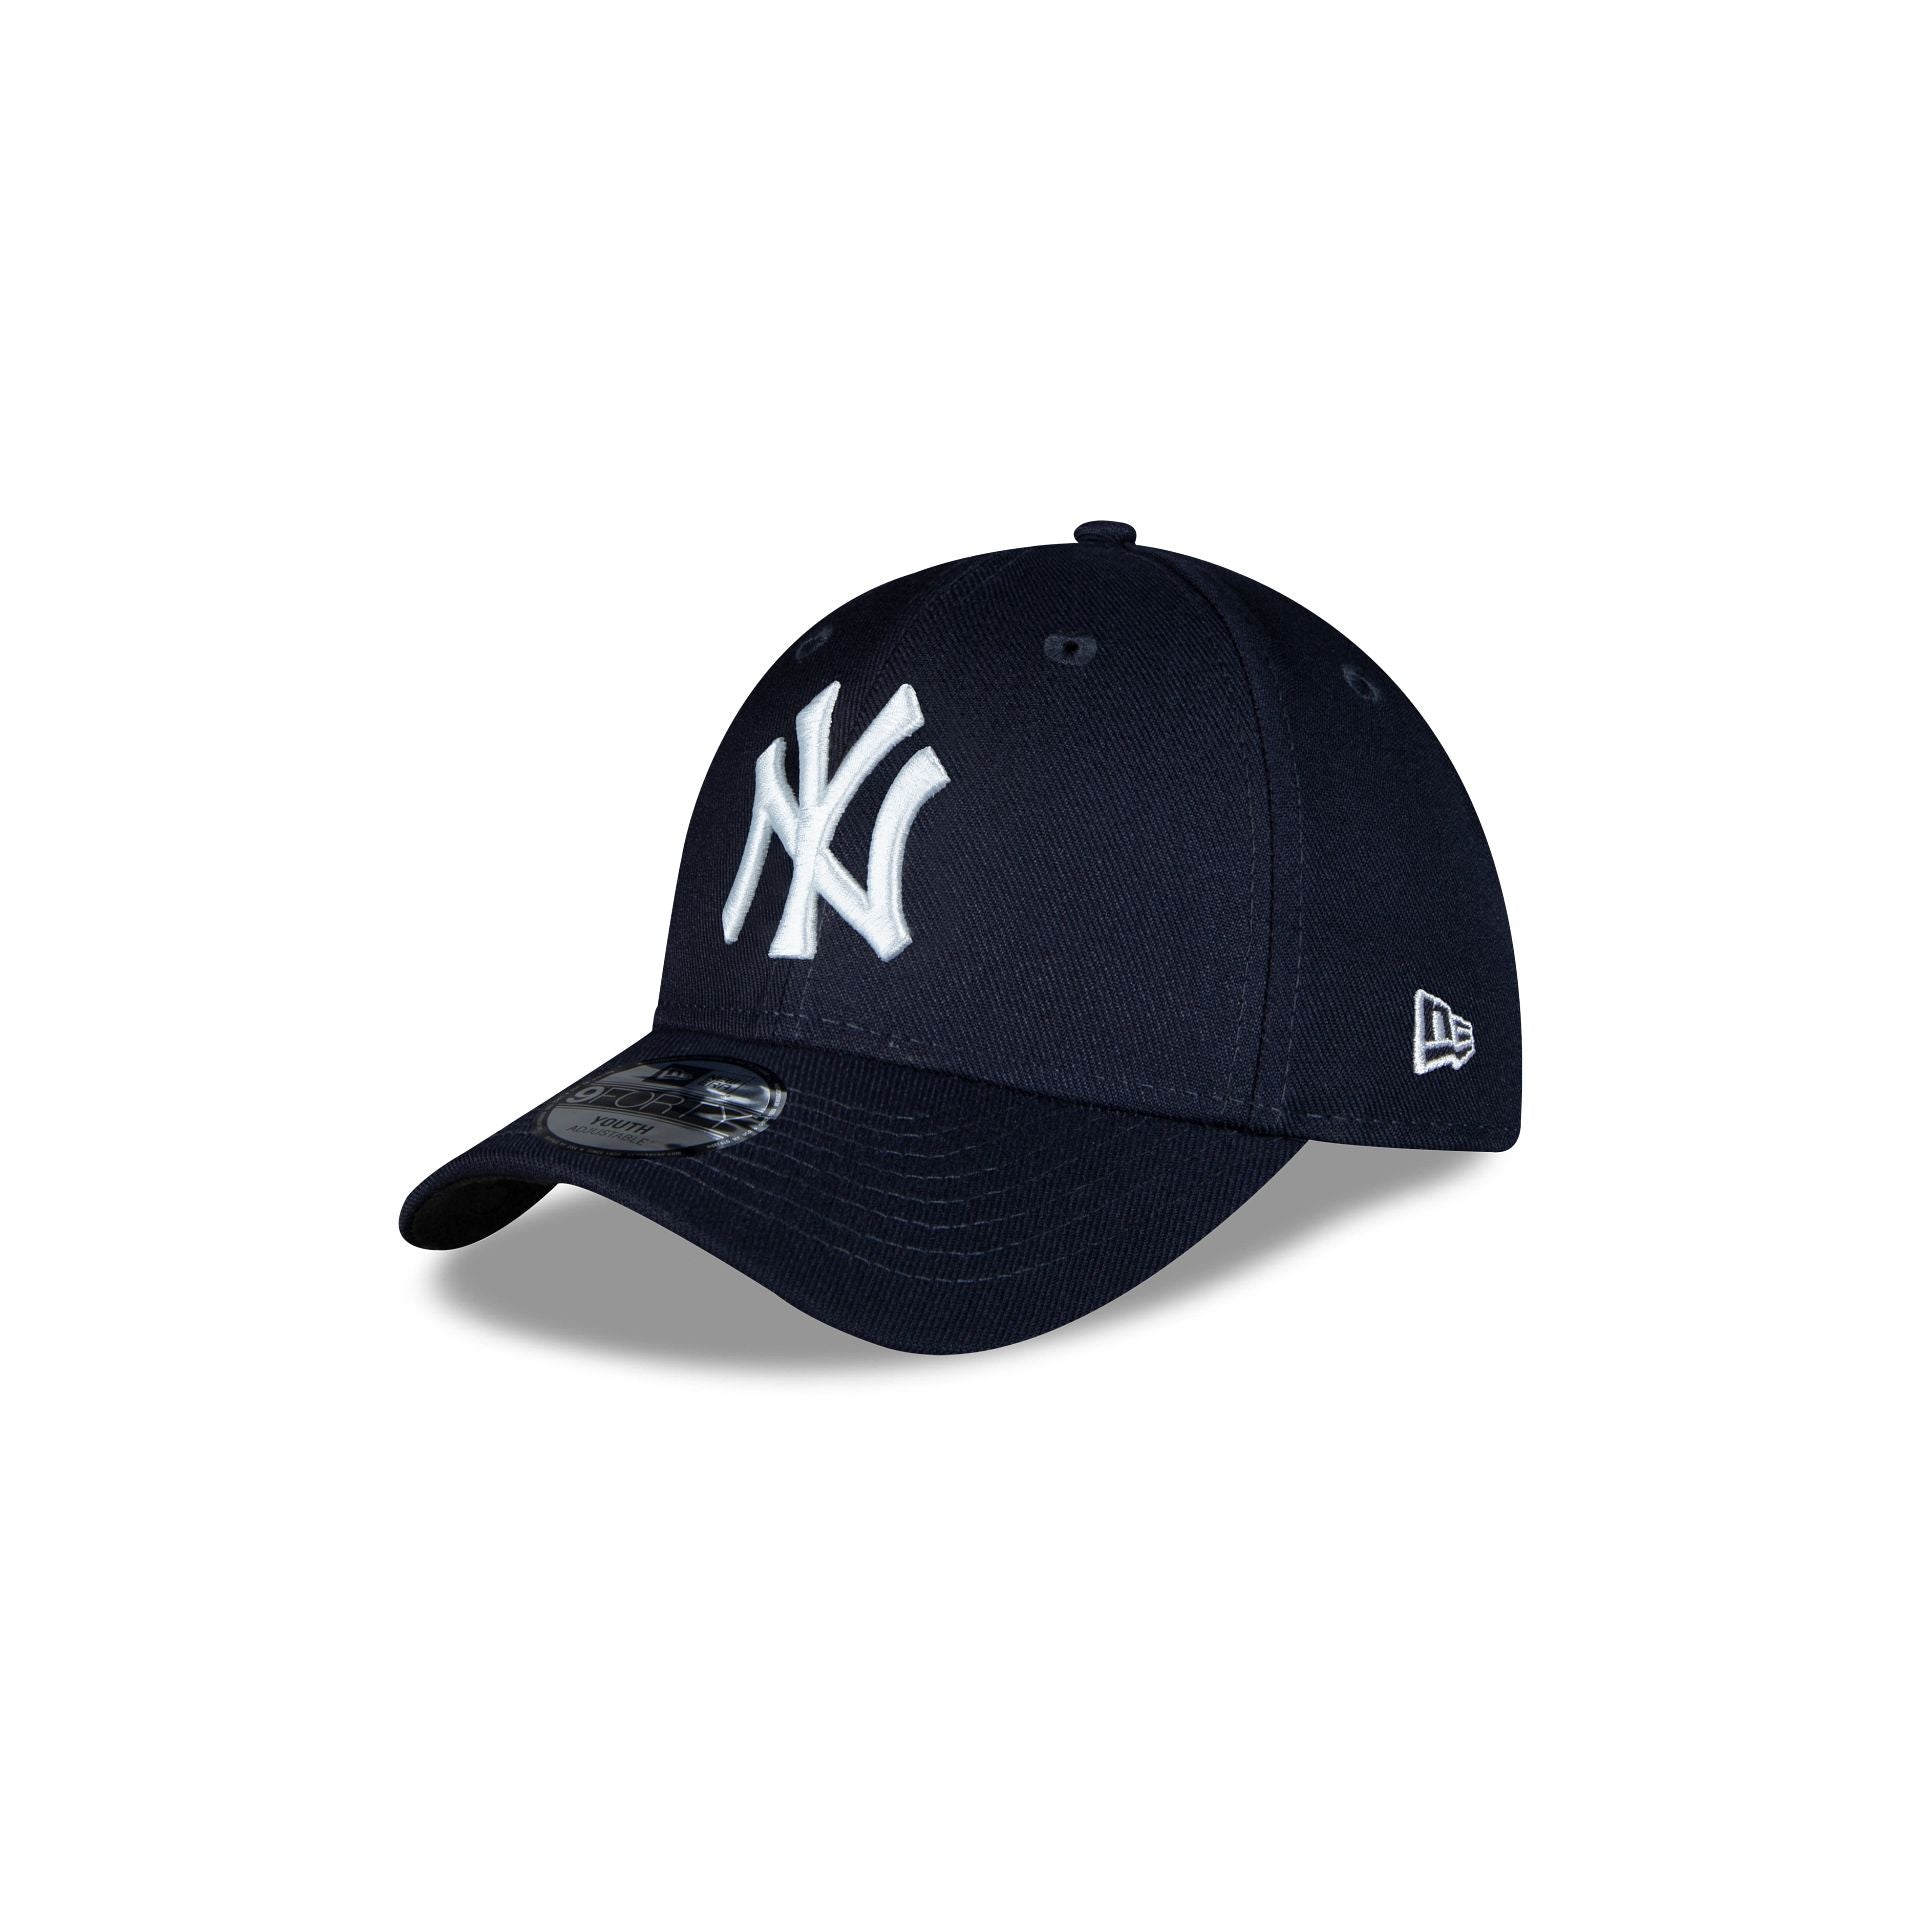 New The Era York Hat Yankees – 9FORTY Cap New Adjustable Kids League